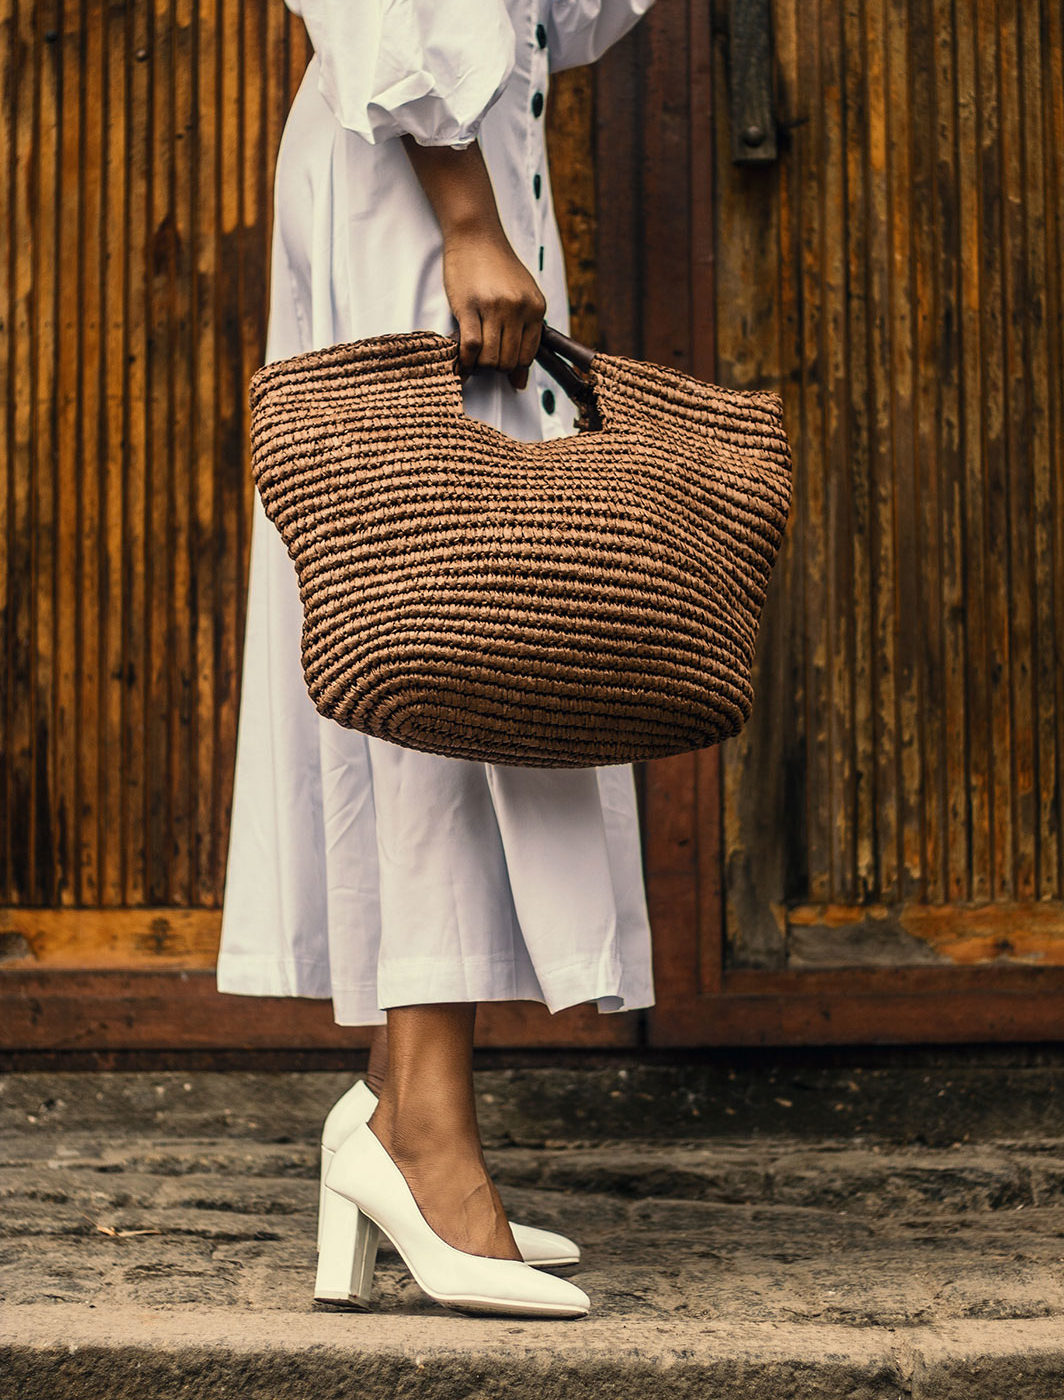 woman-holding-brown-bag-near-brown-wooden-surfac-1942879